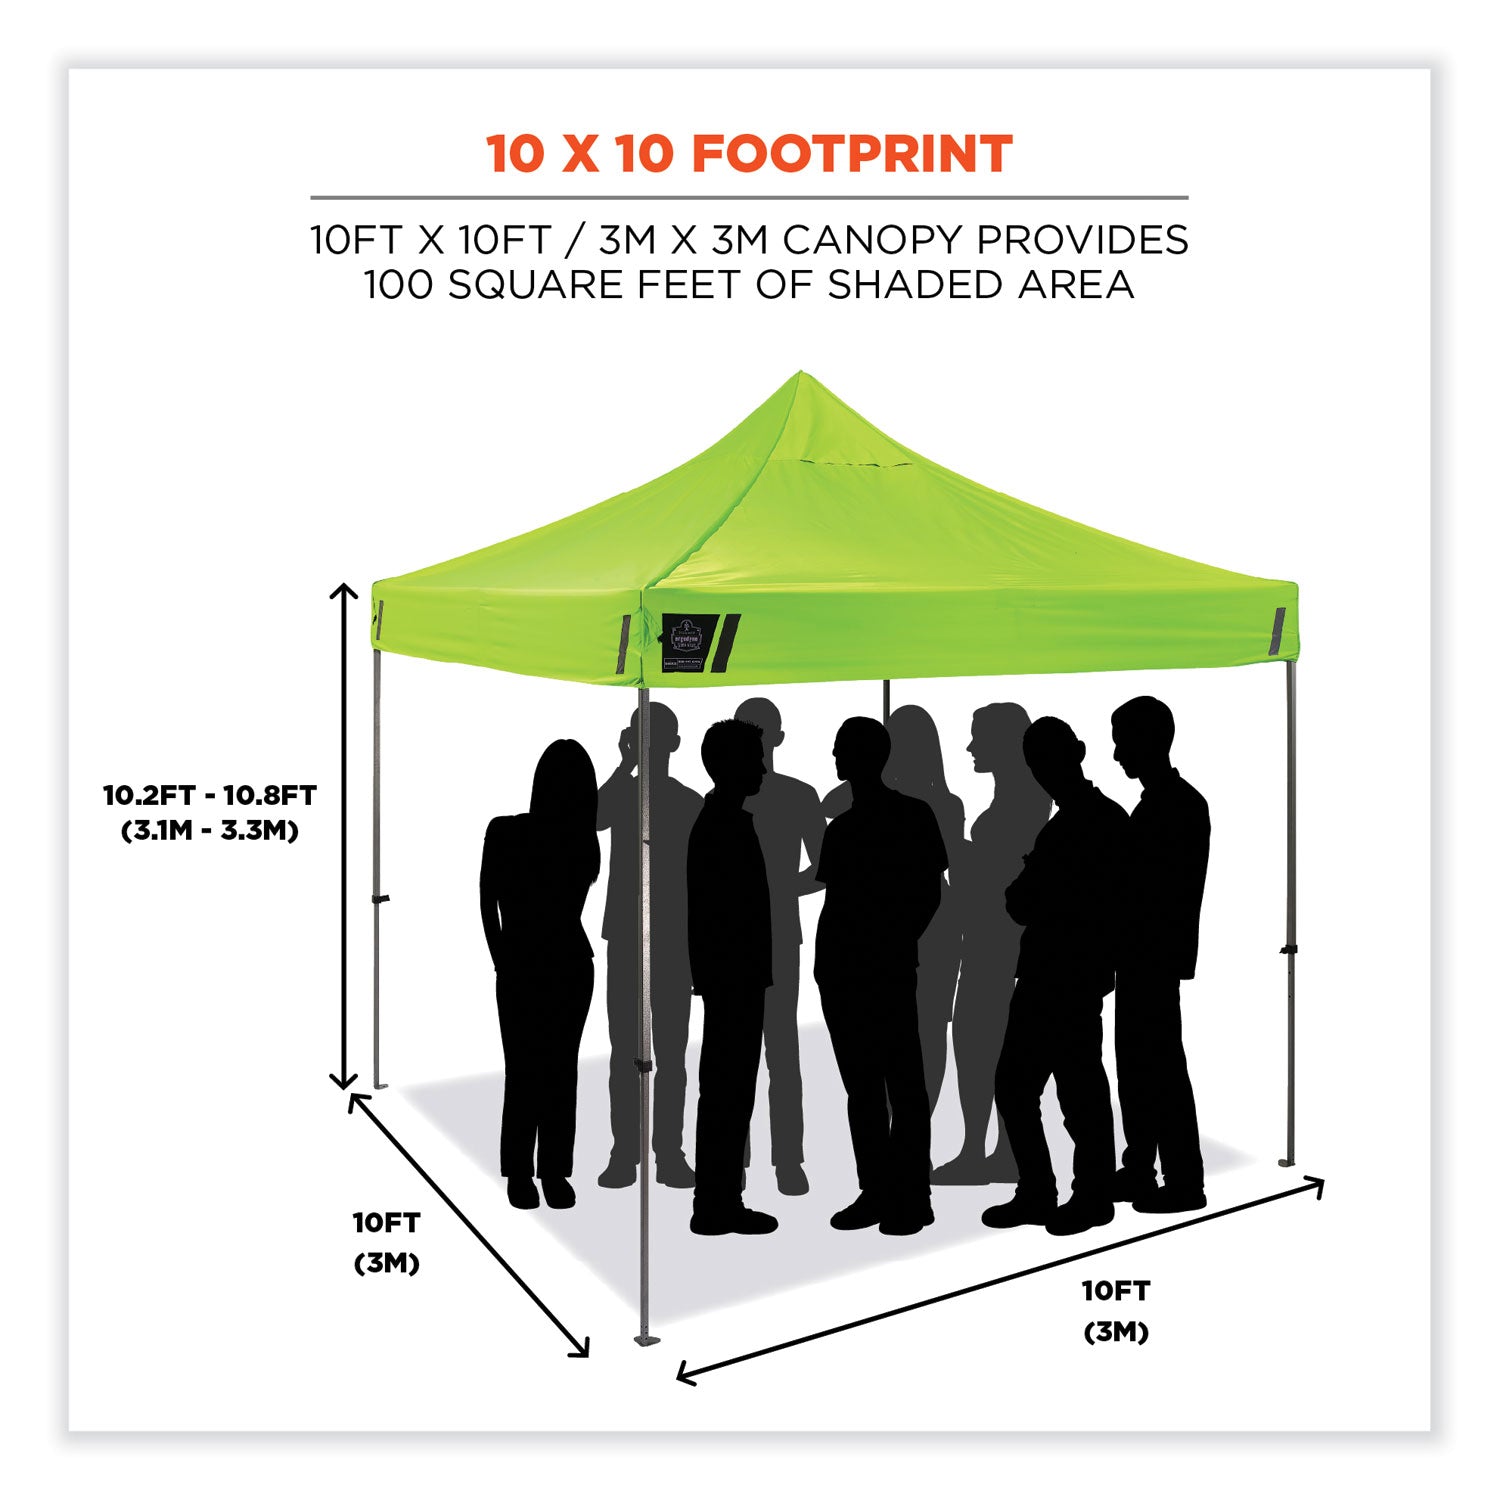 shax-6051-heavy-duty-pop-up-tent-kit-single-skin-10-ft-x-10-ft-polyester-steel-lime-ships-in-1-3-business-days_ego12951 - 2